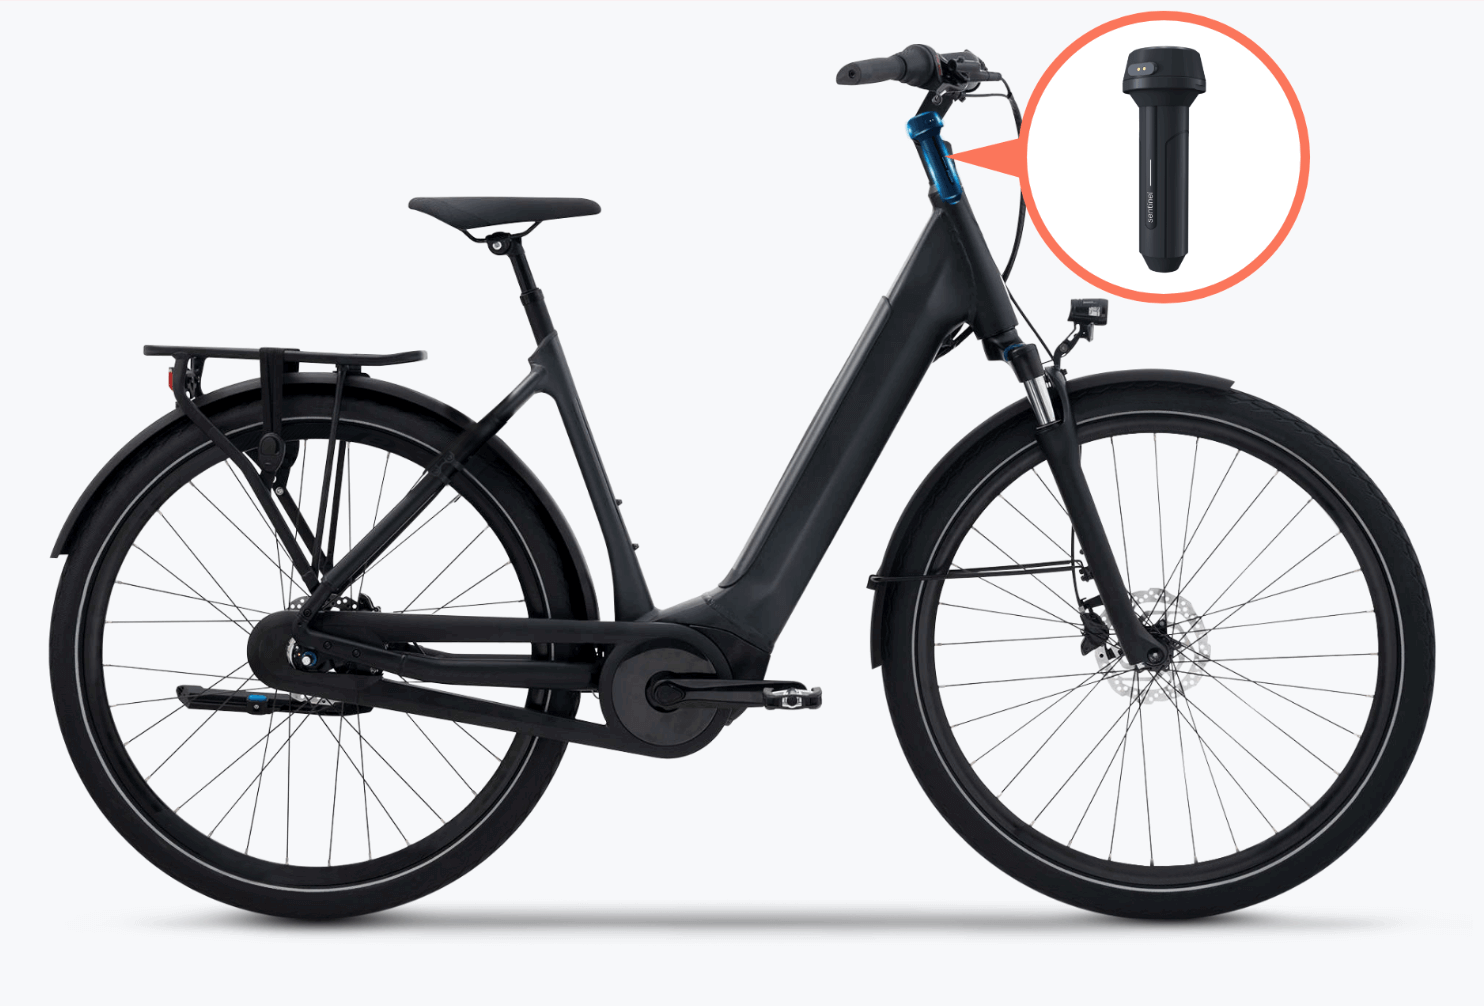 The aftermarket GPS tracker is suitable for bikes with fork caps and fork risers with an outside diameter of 28.6mm or 31.8mm, bikes with carbon fiber forks require a special fitting.